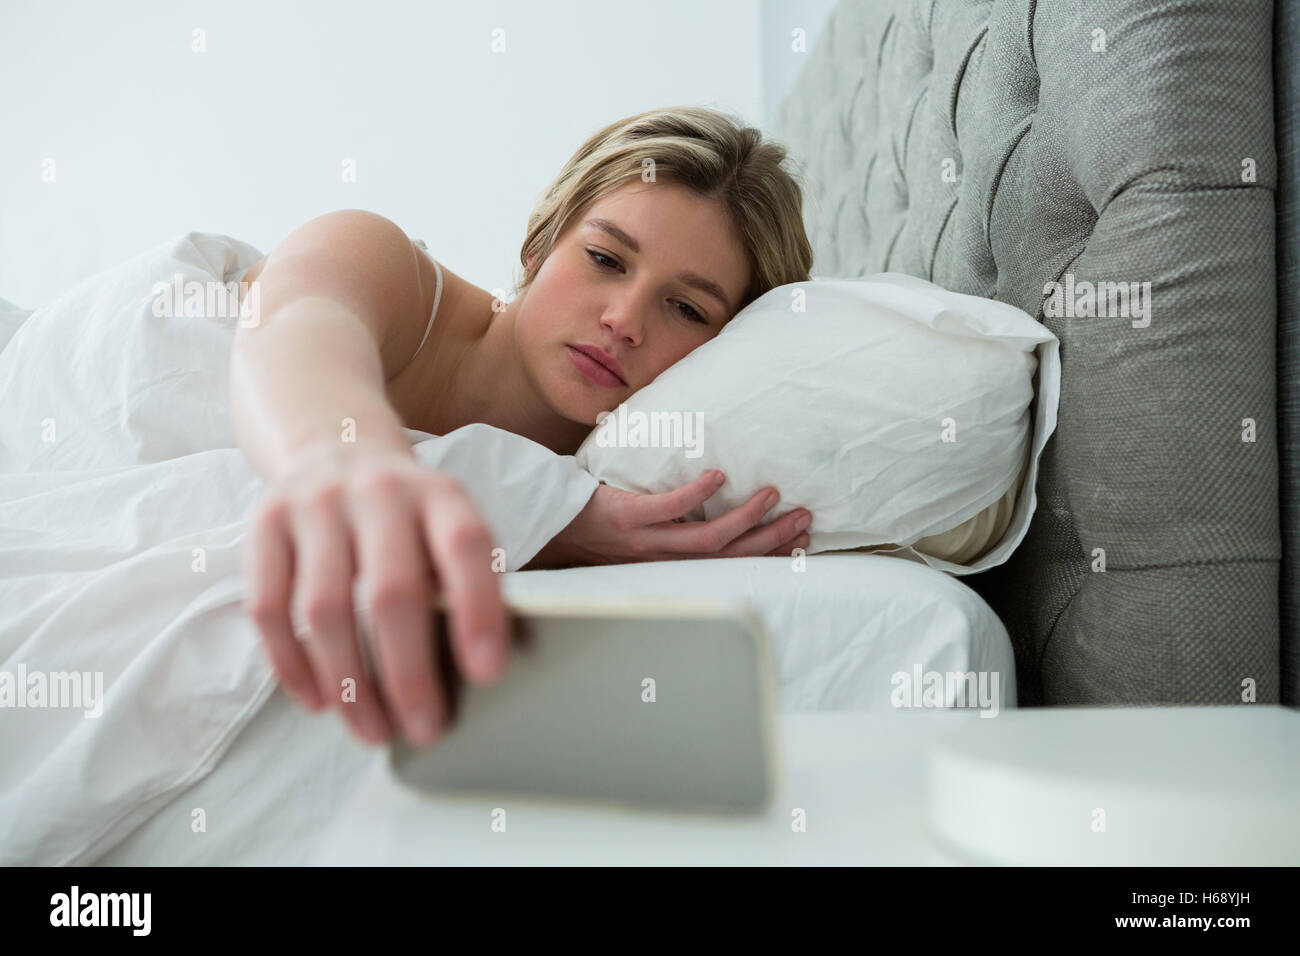 Young woman waking up with mobile alarm clock Stock Photo